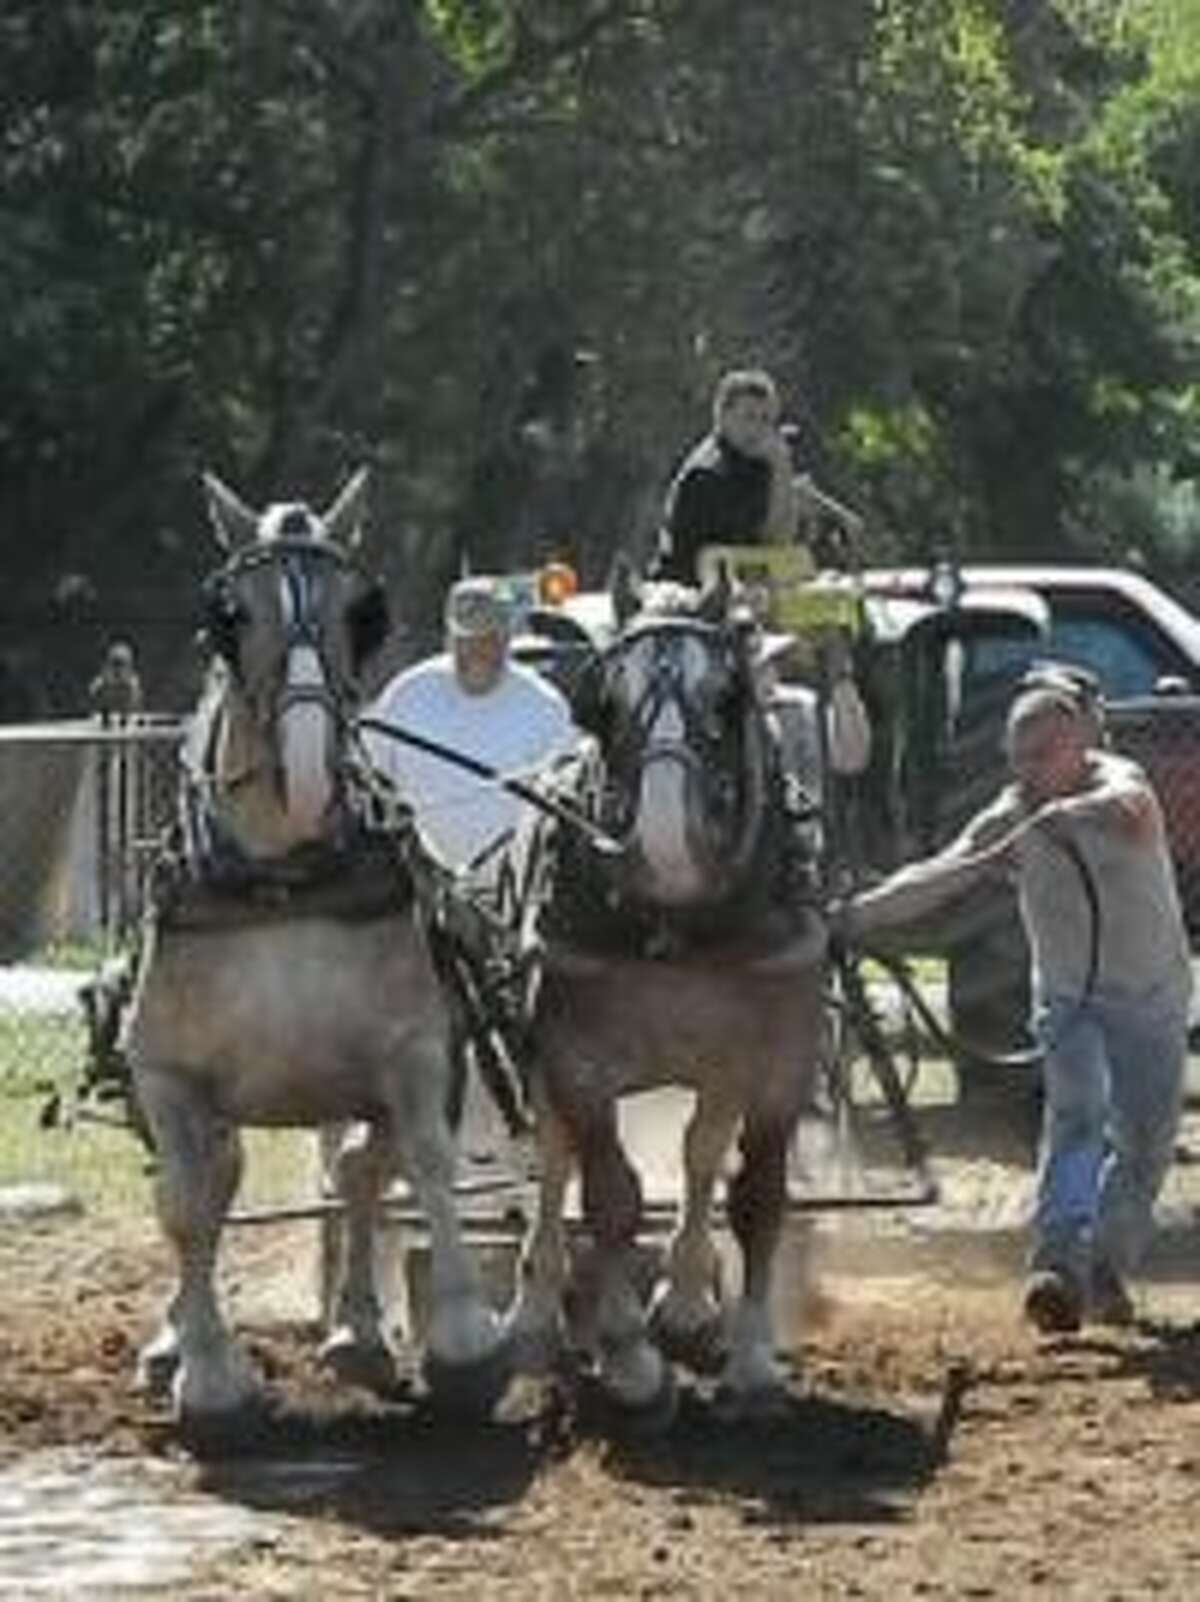 A classic fair scene in a photo from the website of the Orange Country Fair.